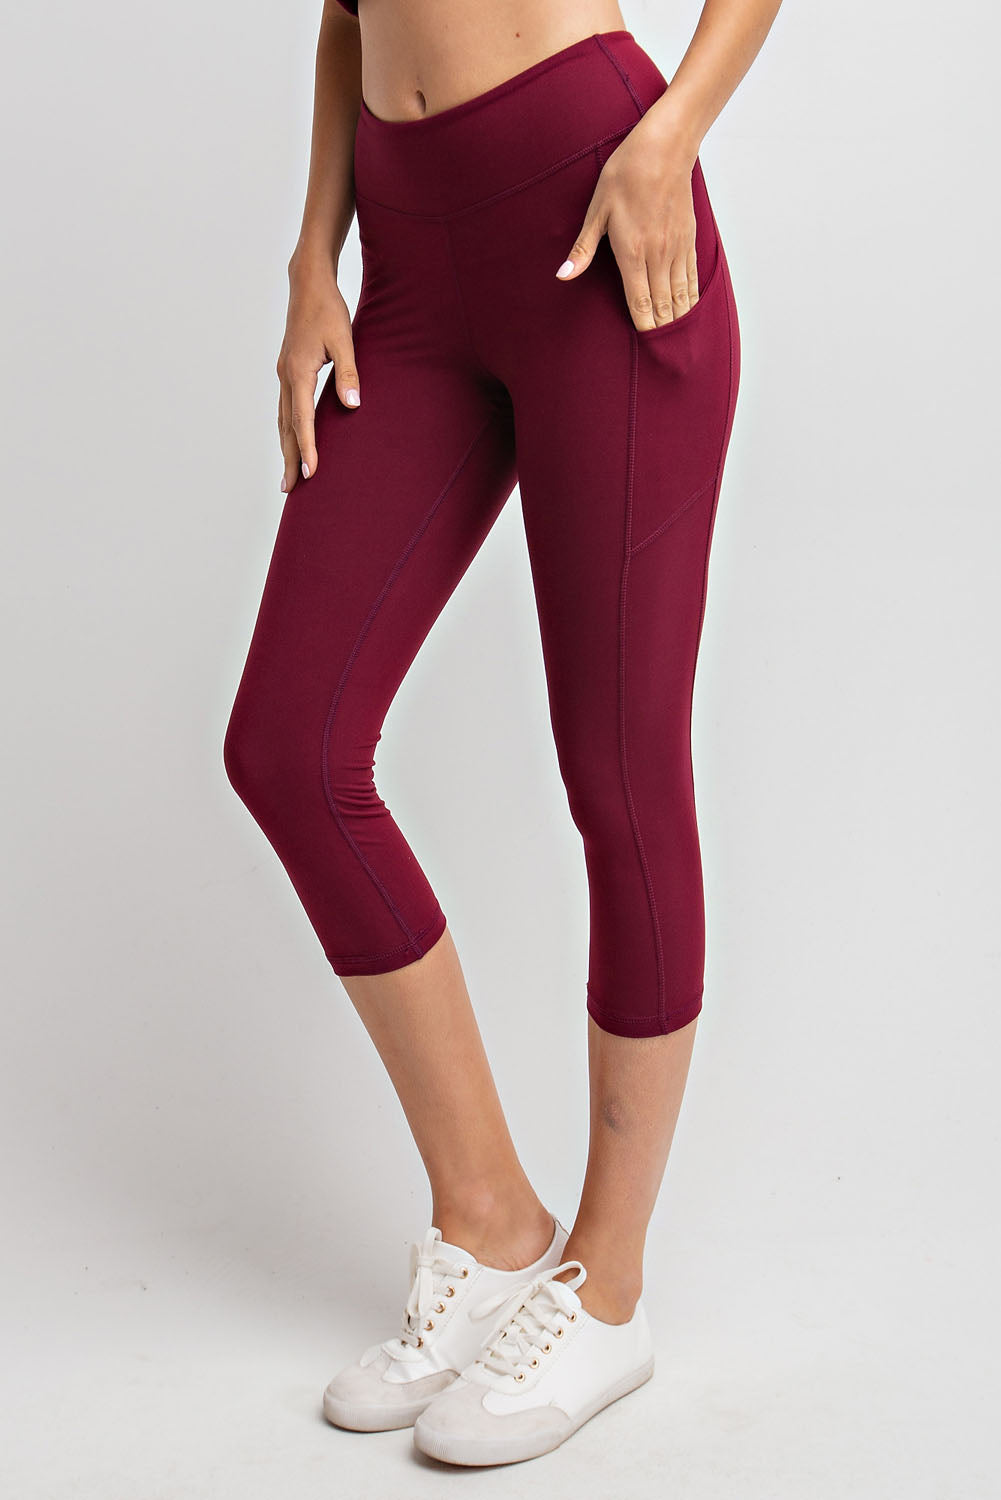 Buy Zelocity True Curv High Impact High Rise Quick Dry Leggings - Burgundy  at Rs.1248 online | Activewear online